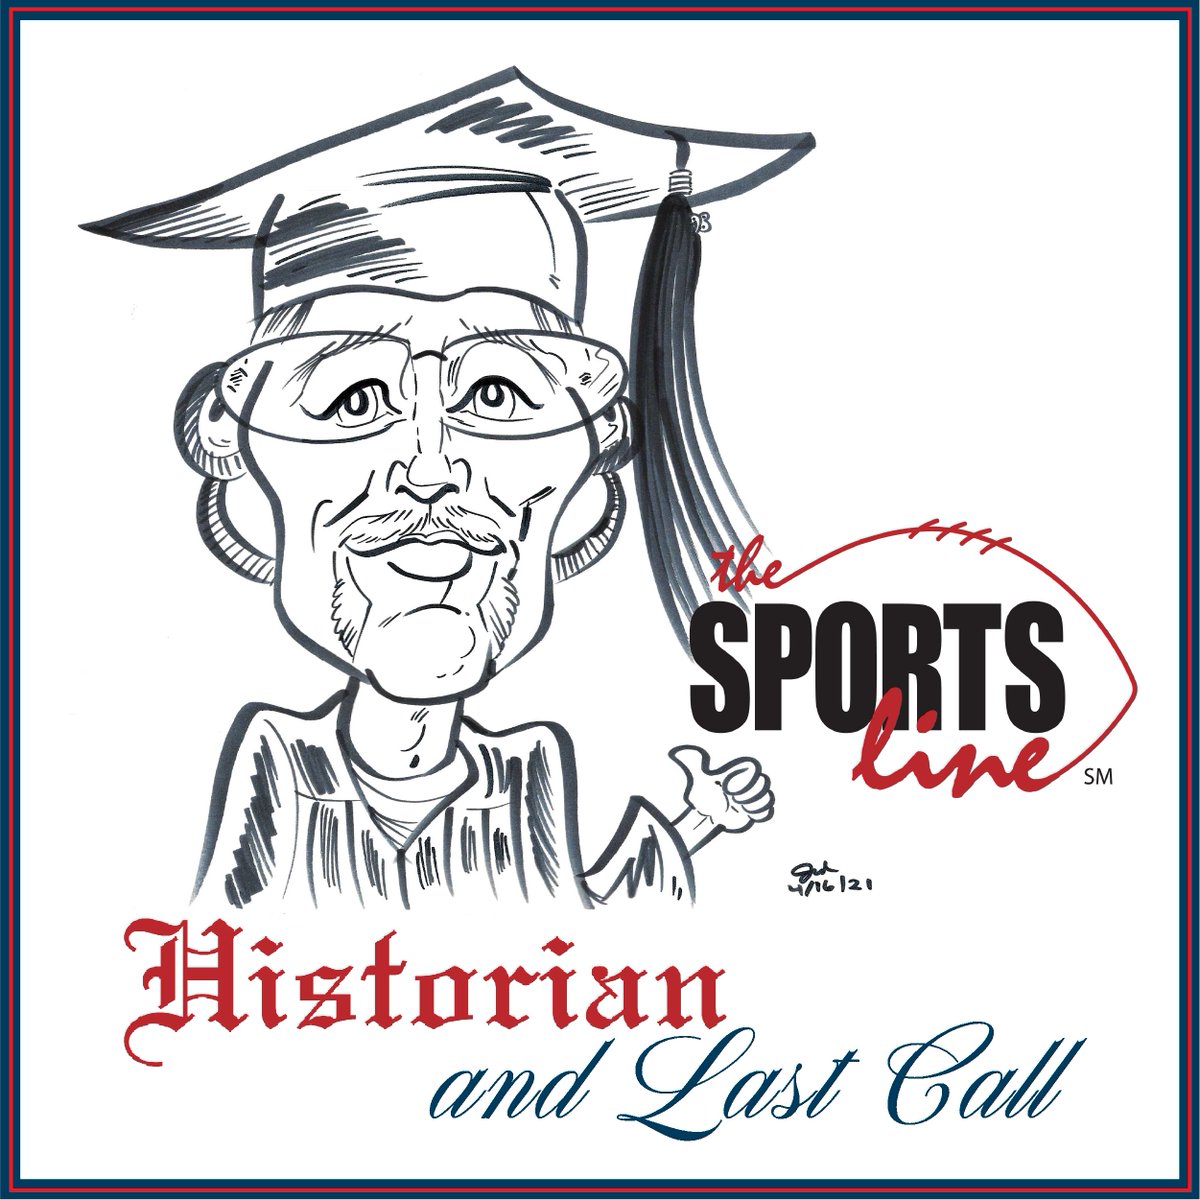 History & Hilarity! 

@TWlni, the #Historian joined to talk #TomBrady's deflated balls and Mr. #Ass, and later #LastCall featured out-of-context audio from this week, including #TonyElliott, caller Bill + hosts #RR and #DC:

🔗: wlni.com/sportsline-his…
🔗: wlni.com/?s=Last+Call